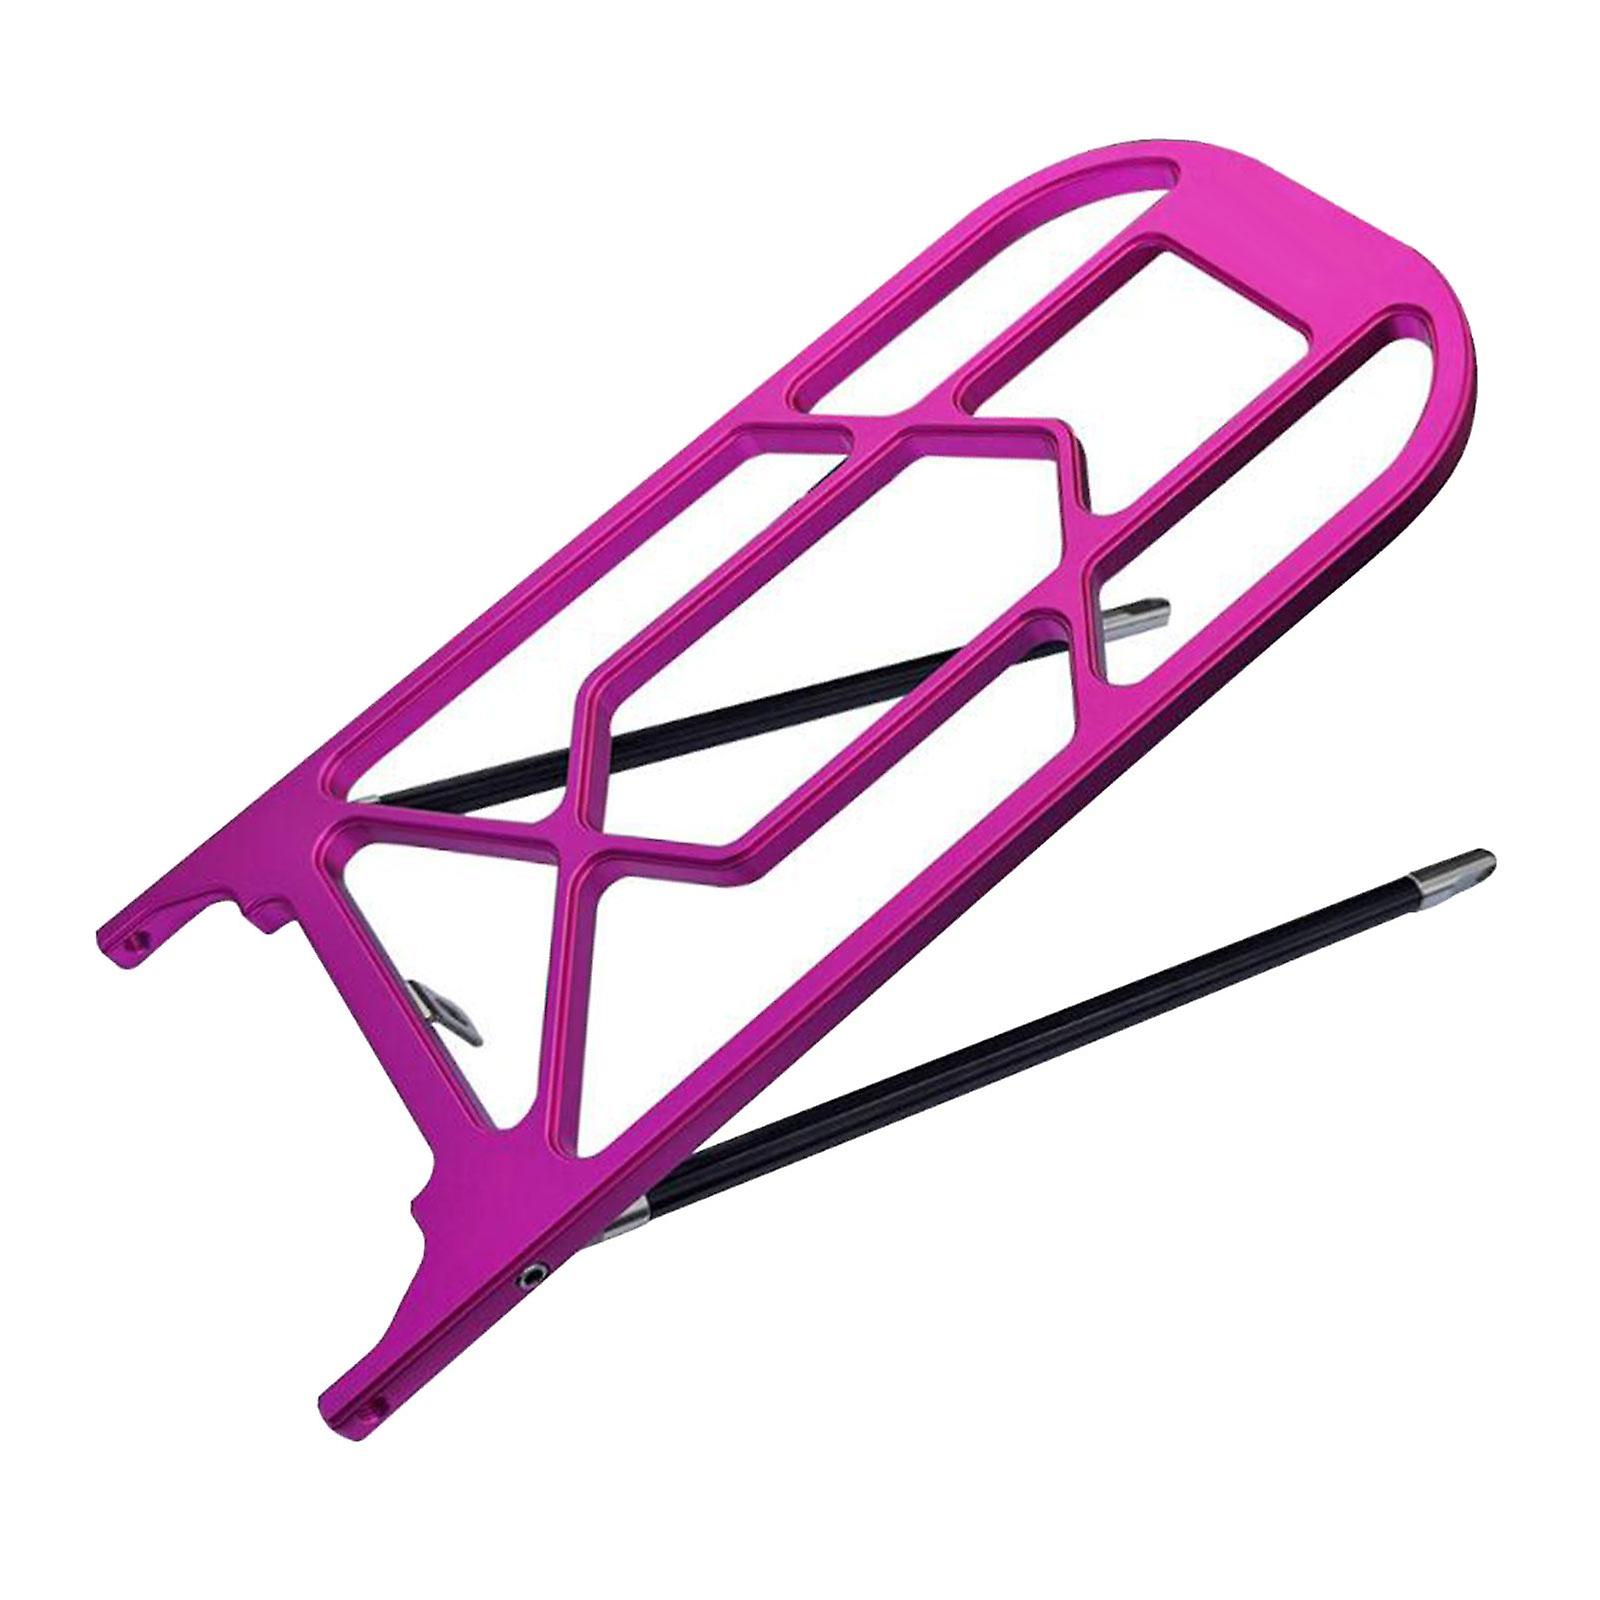 Folding Bicycle Rear Cargo Rack Stand Support Folded Bikes Rear Luggage Rack Pink